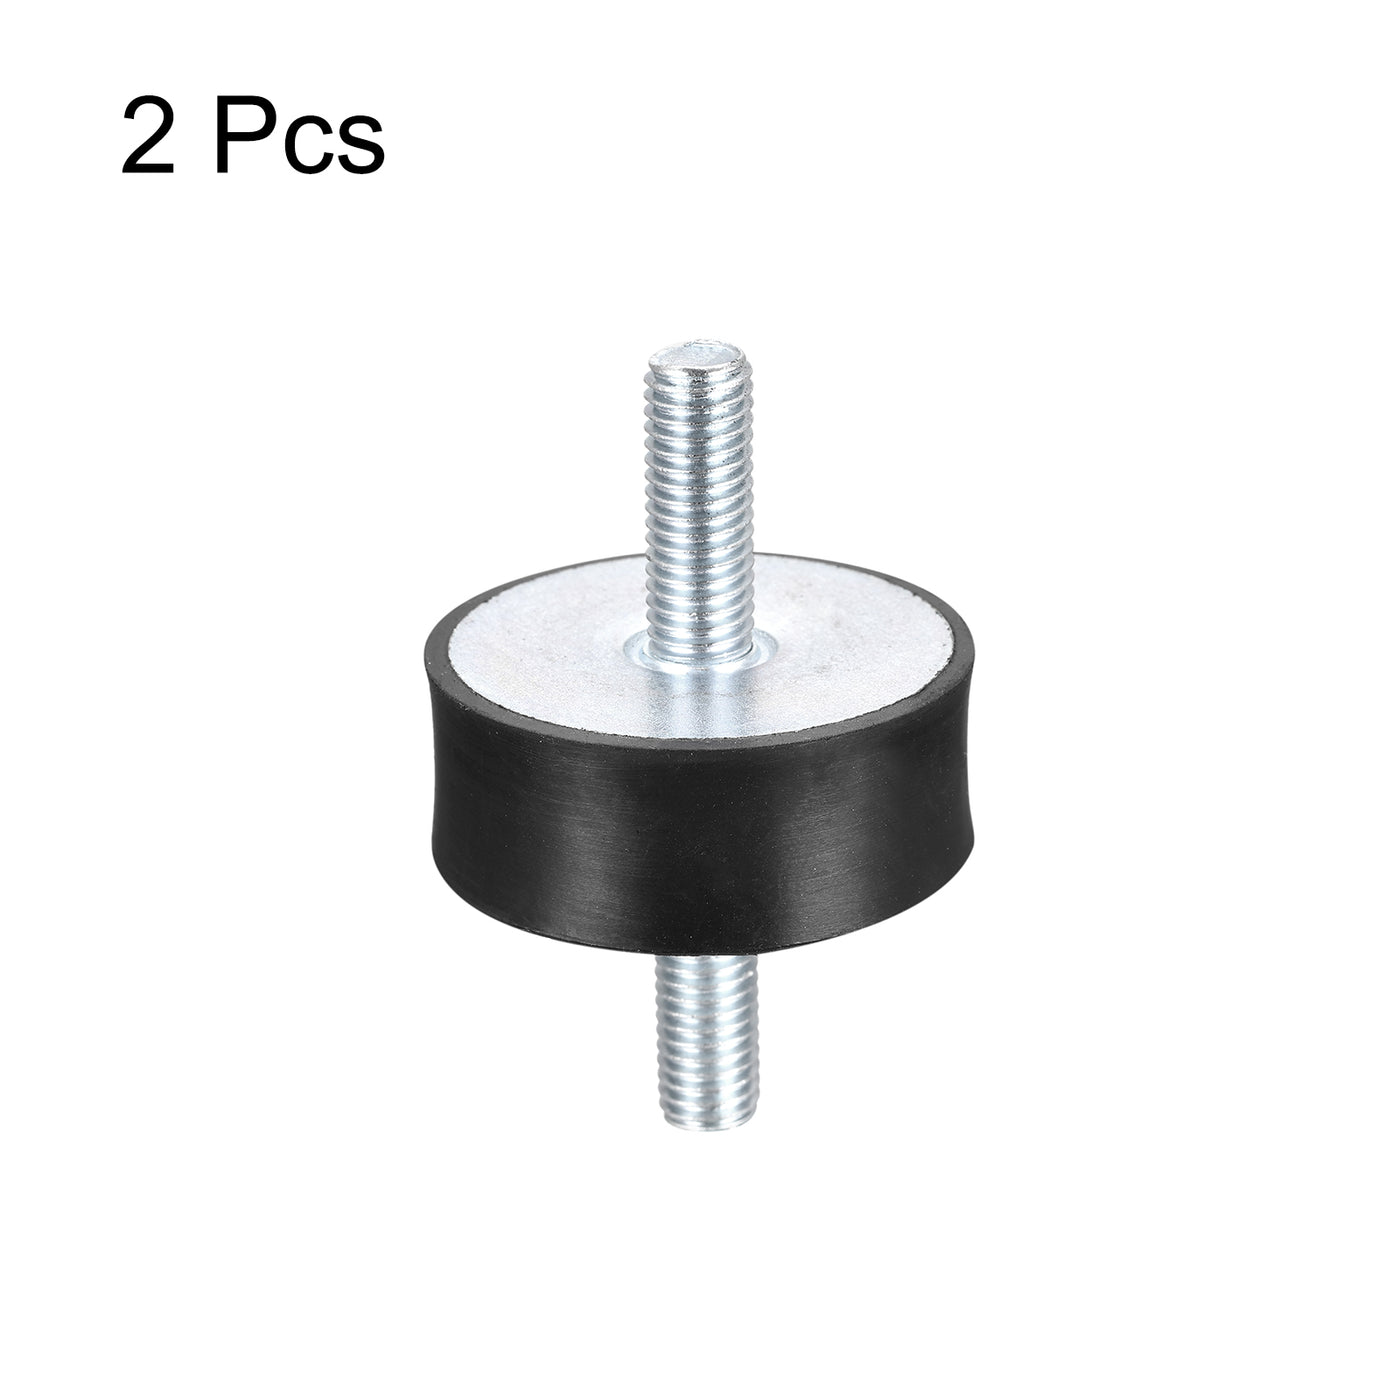 uxcell Uxcell Rubber Mounts 2pcs M10x28mm Male Vibration Isolator Shock Absorber D50mmxH20mm